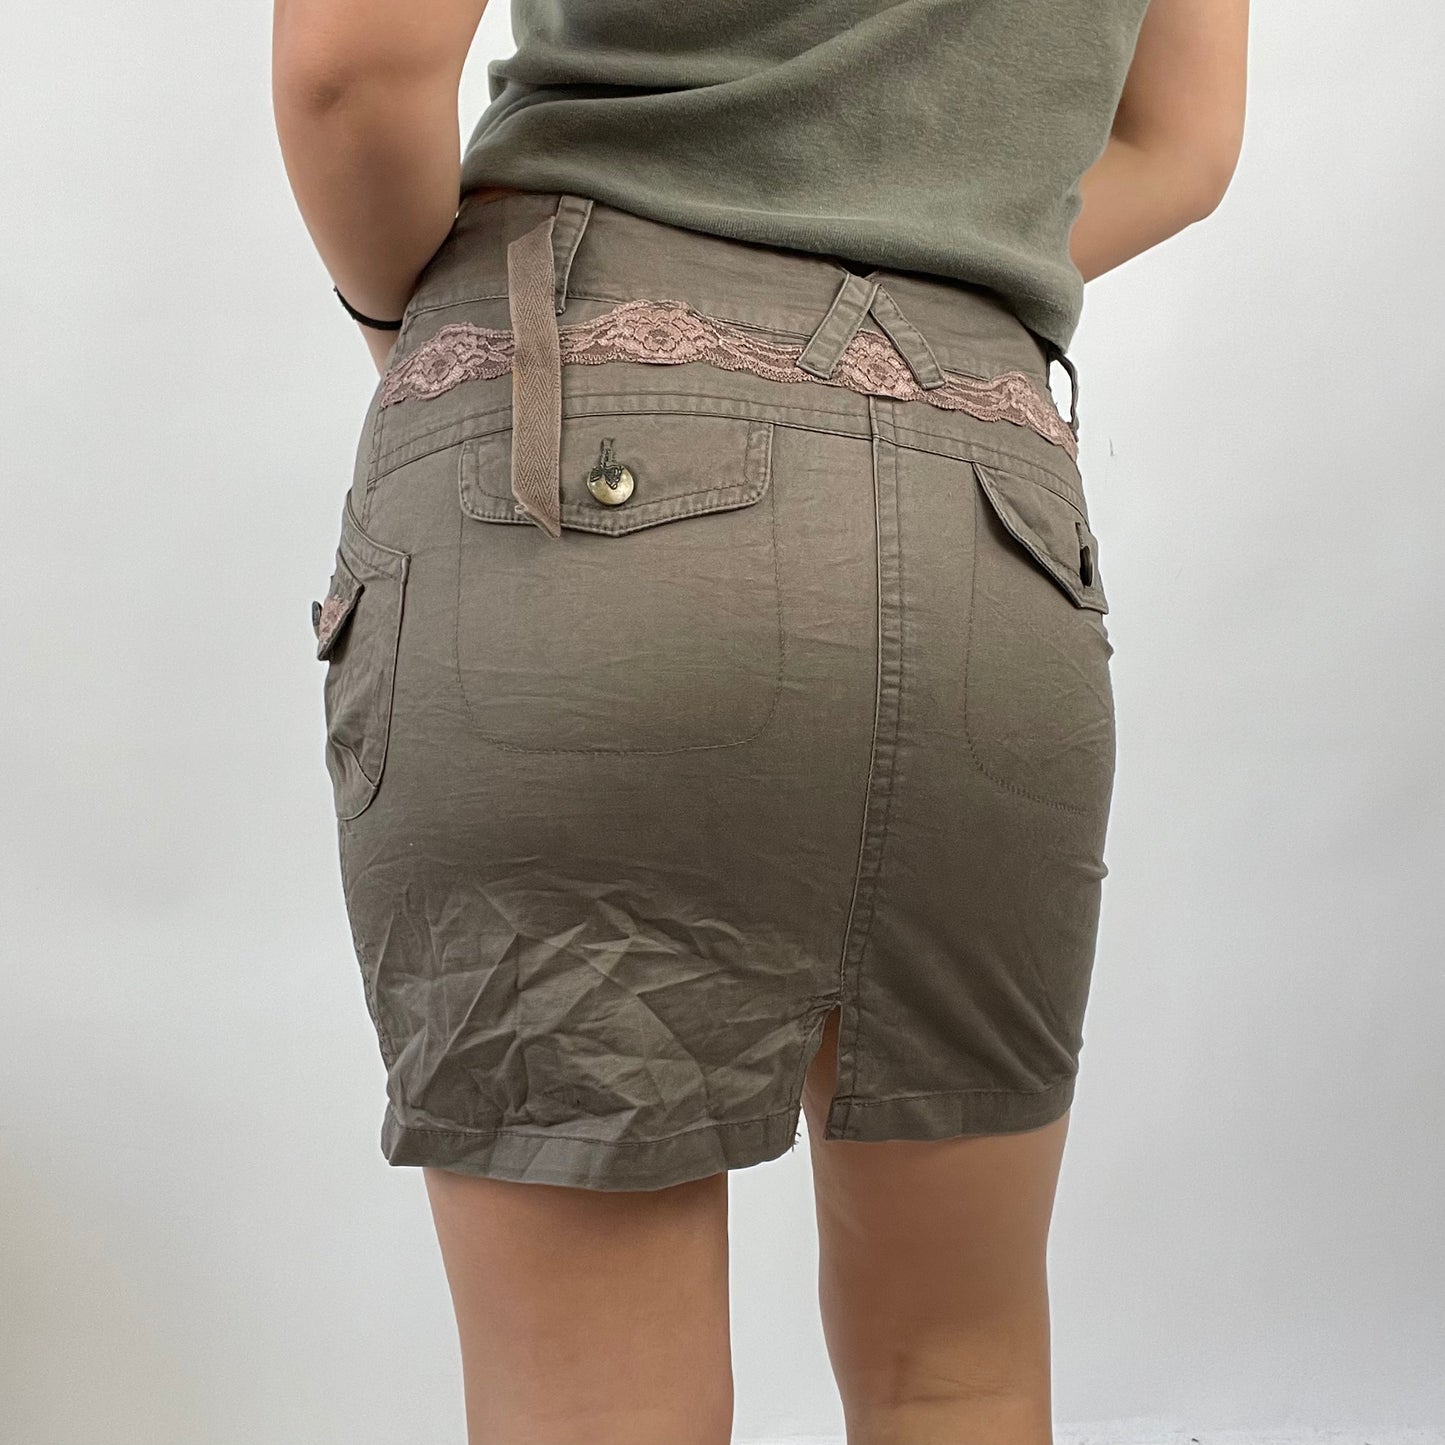 COTTAGECORE DROP | small brown cargo style mini skirt with lace pocket detail